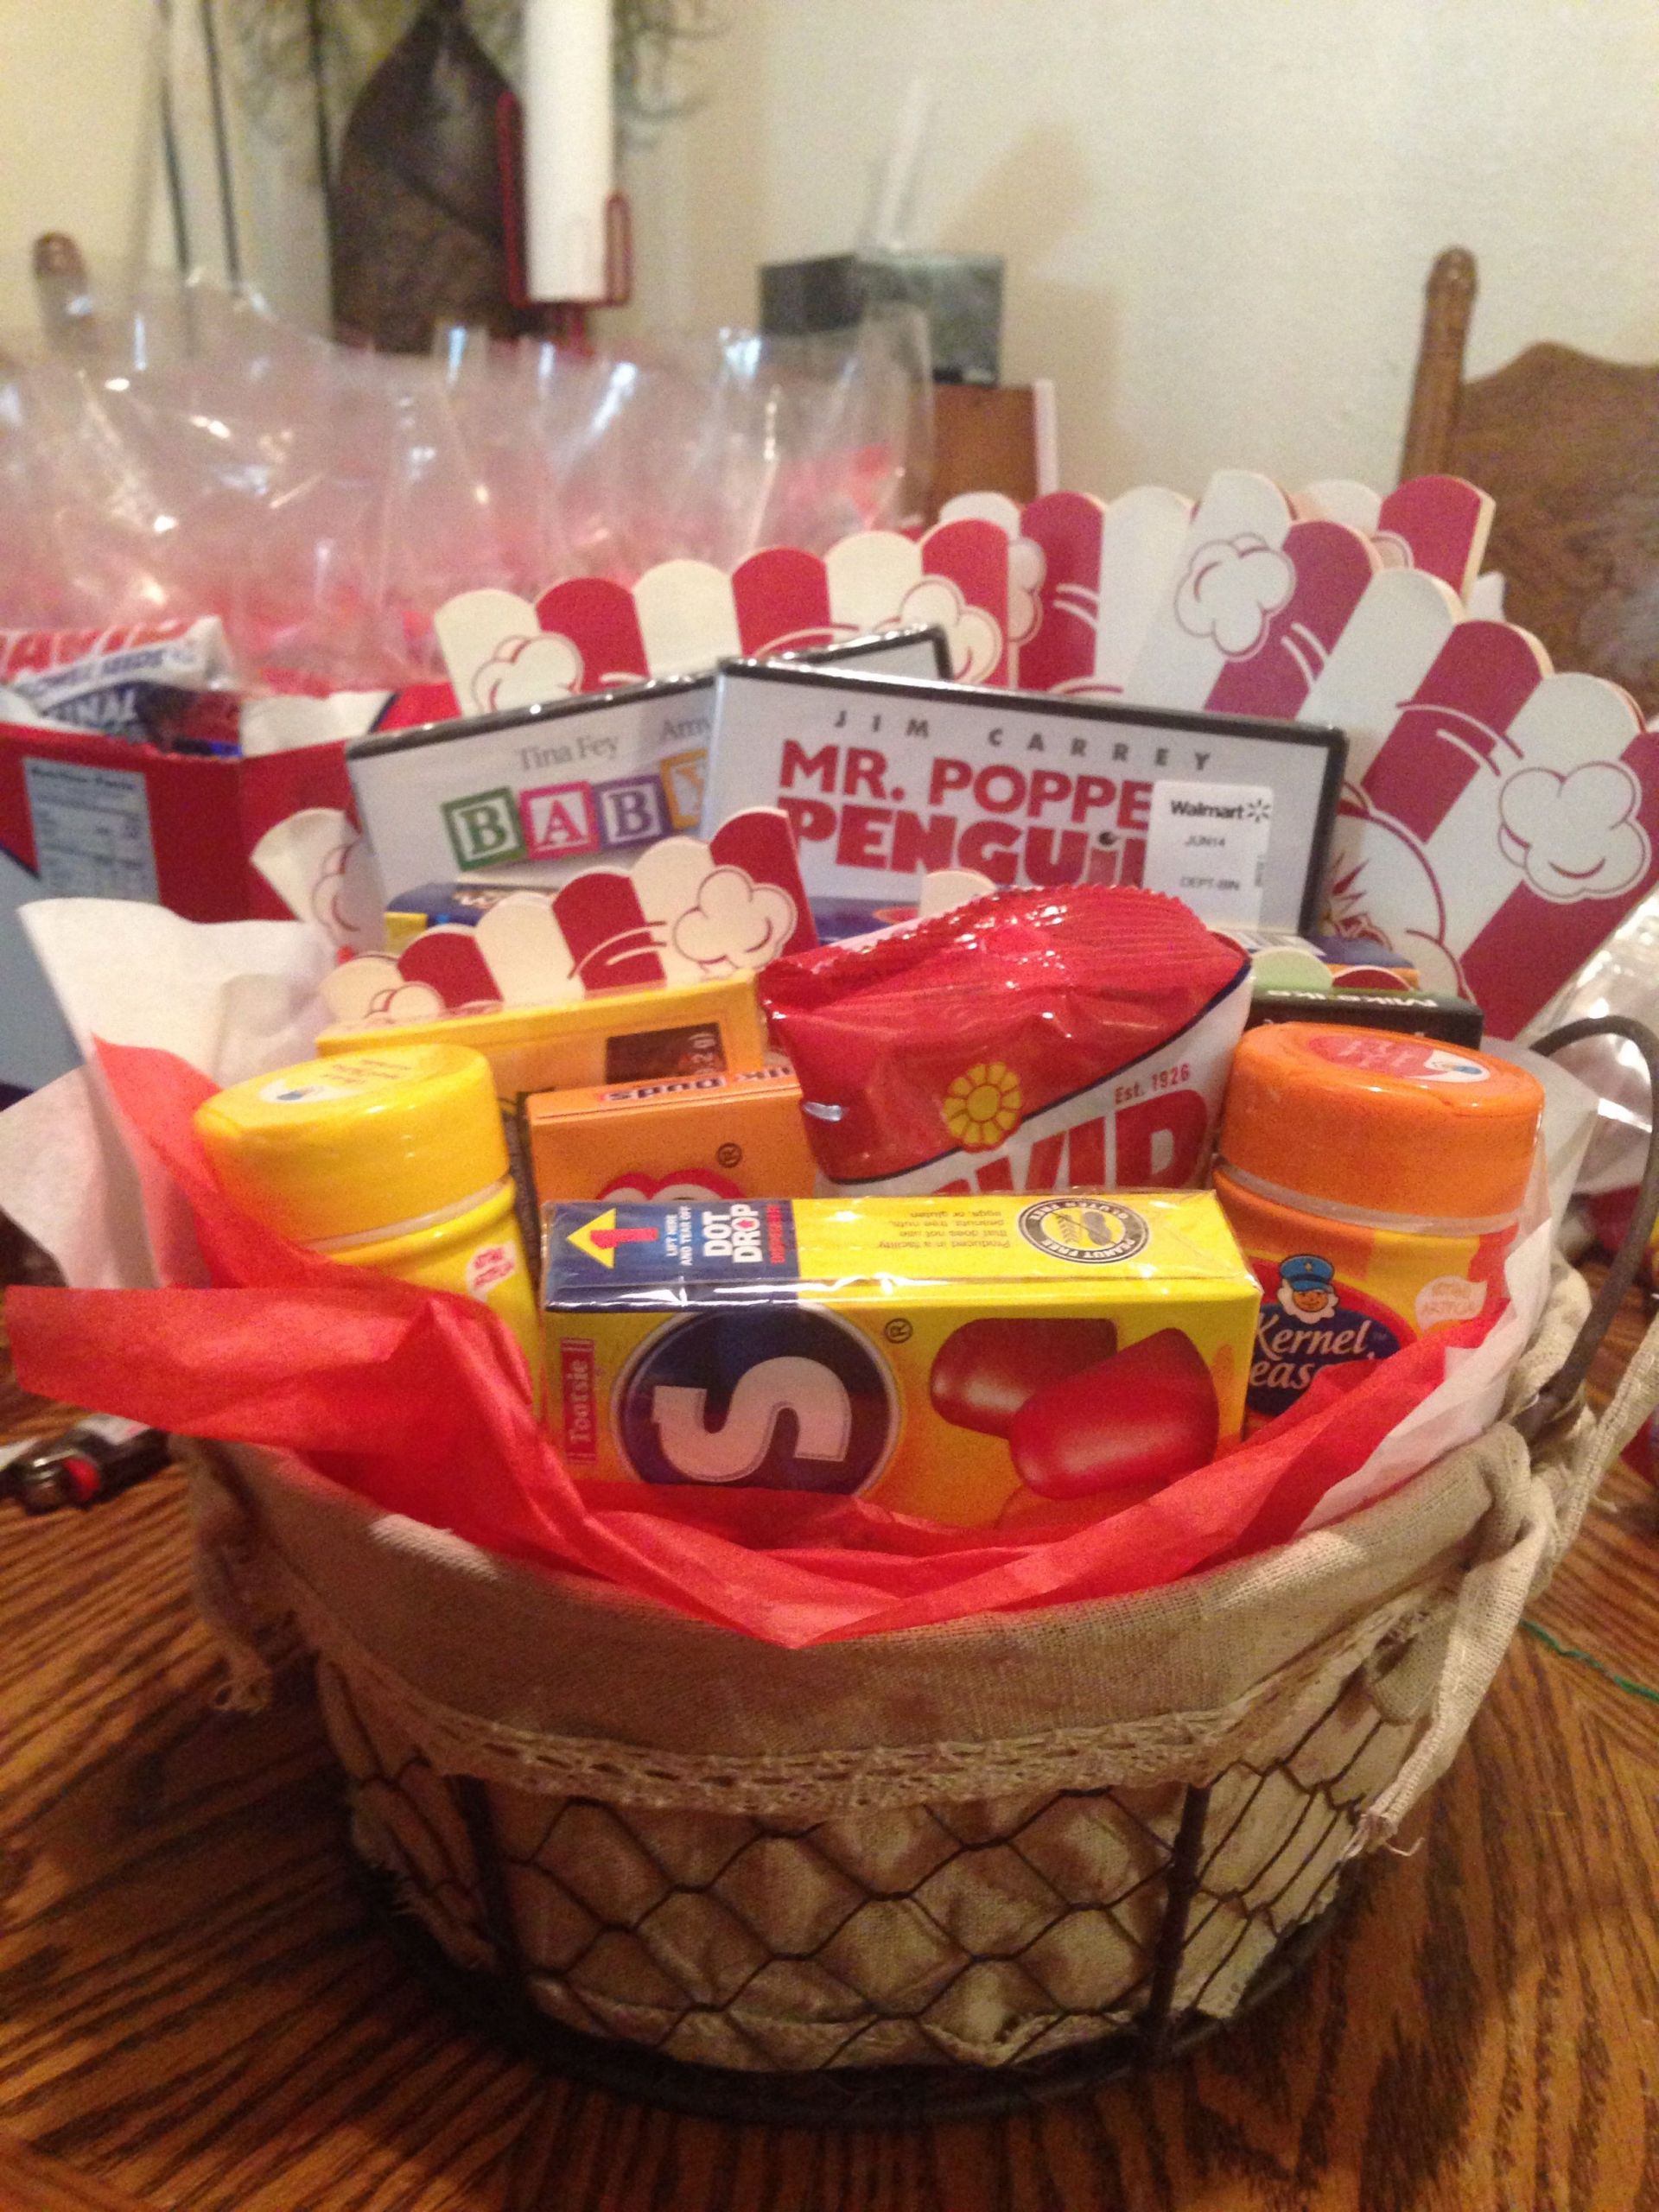 Gift Basket Ideas For Baby Shower Raffle
 Here is the diaper raffle prize for my baby shower A movie night in a basket plete with